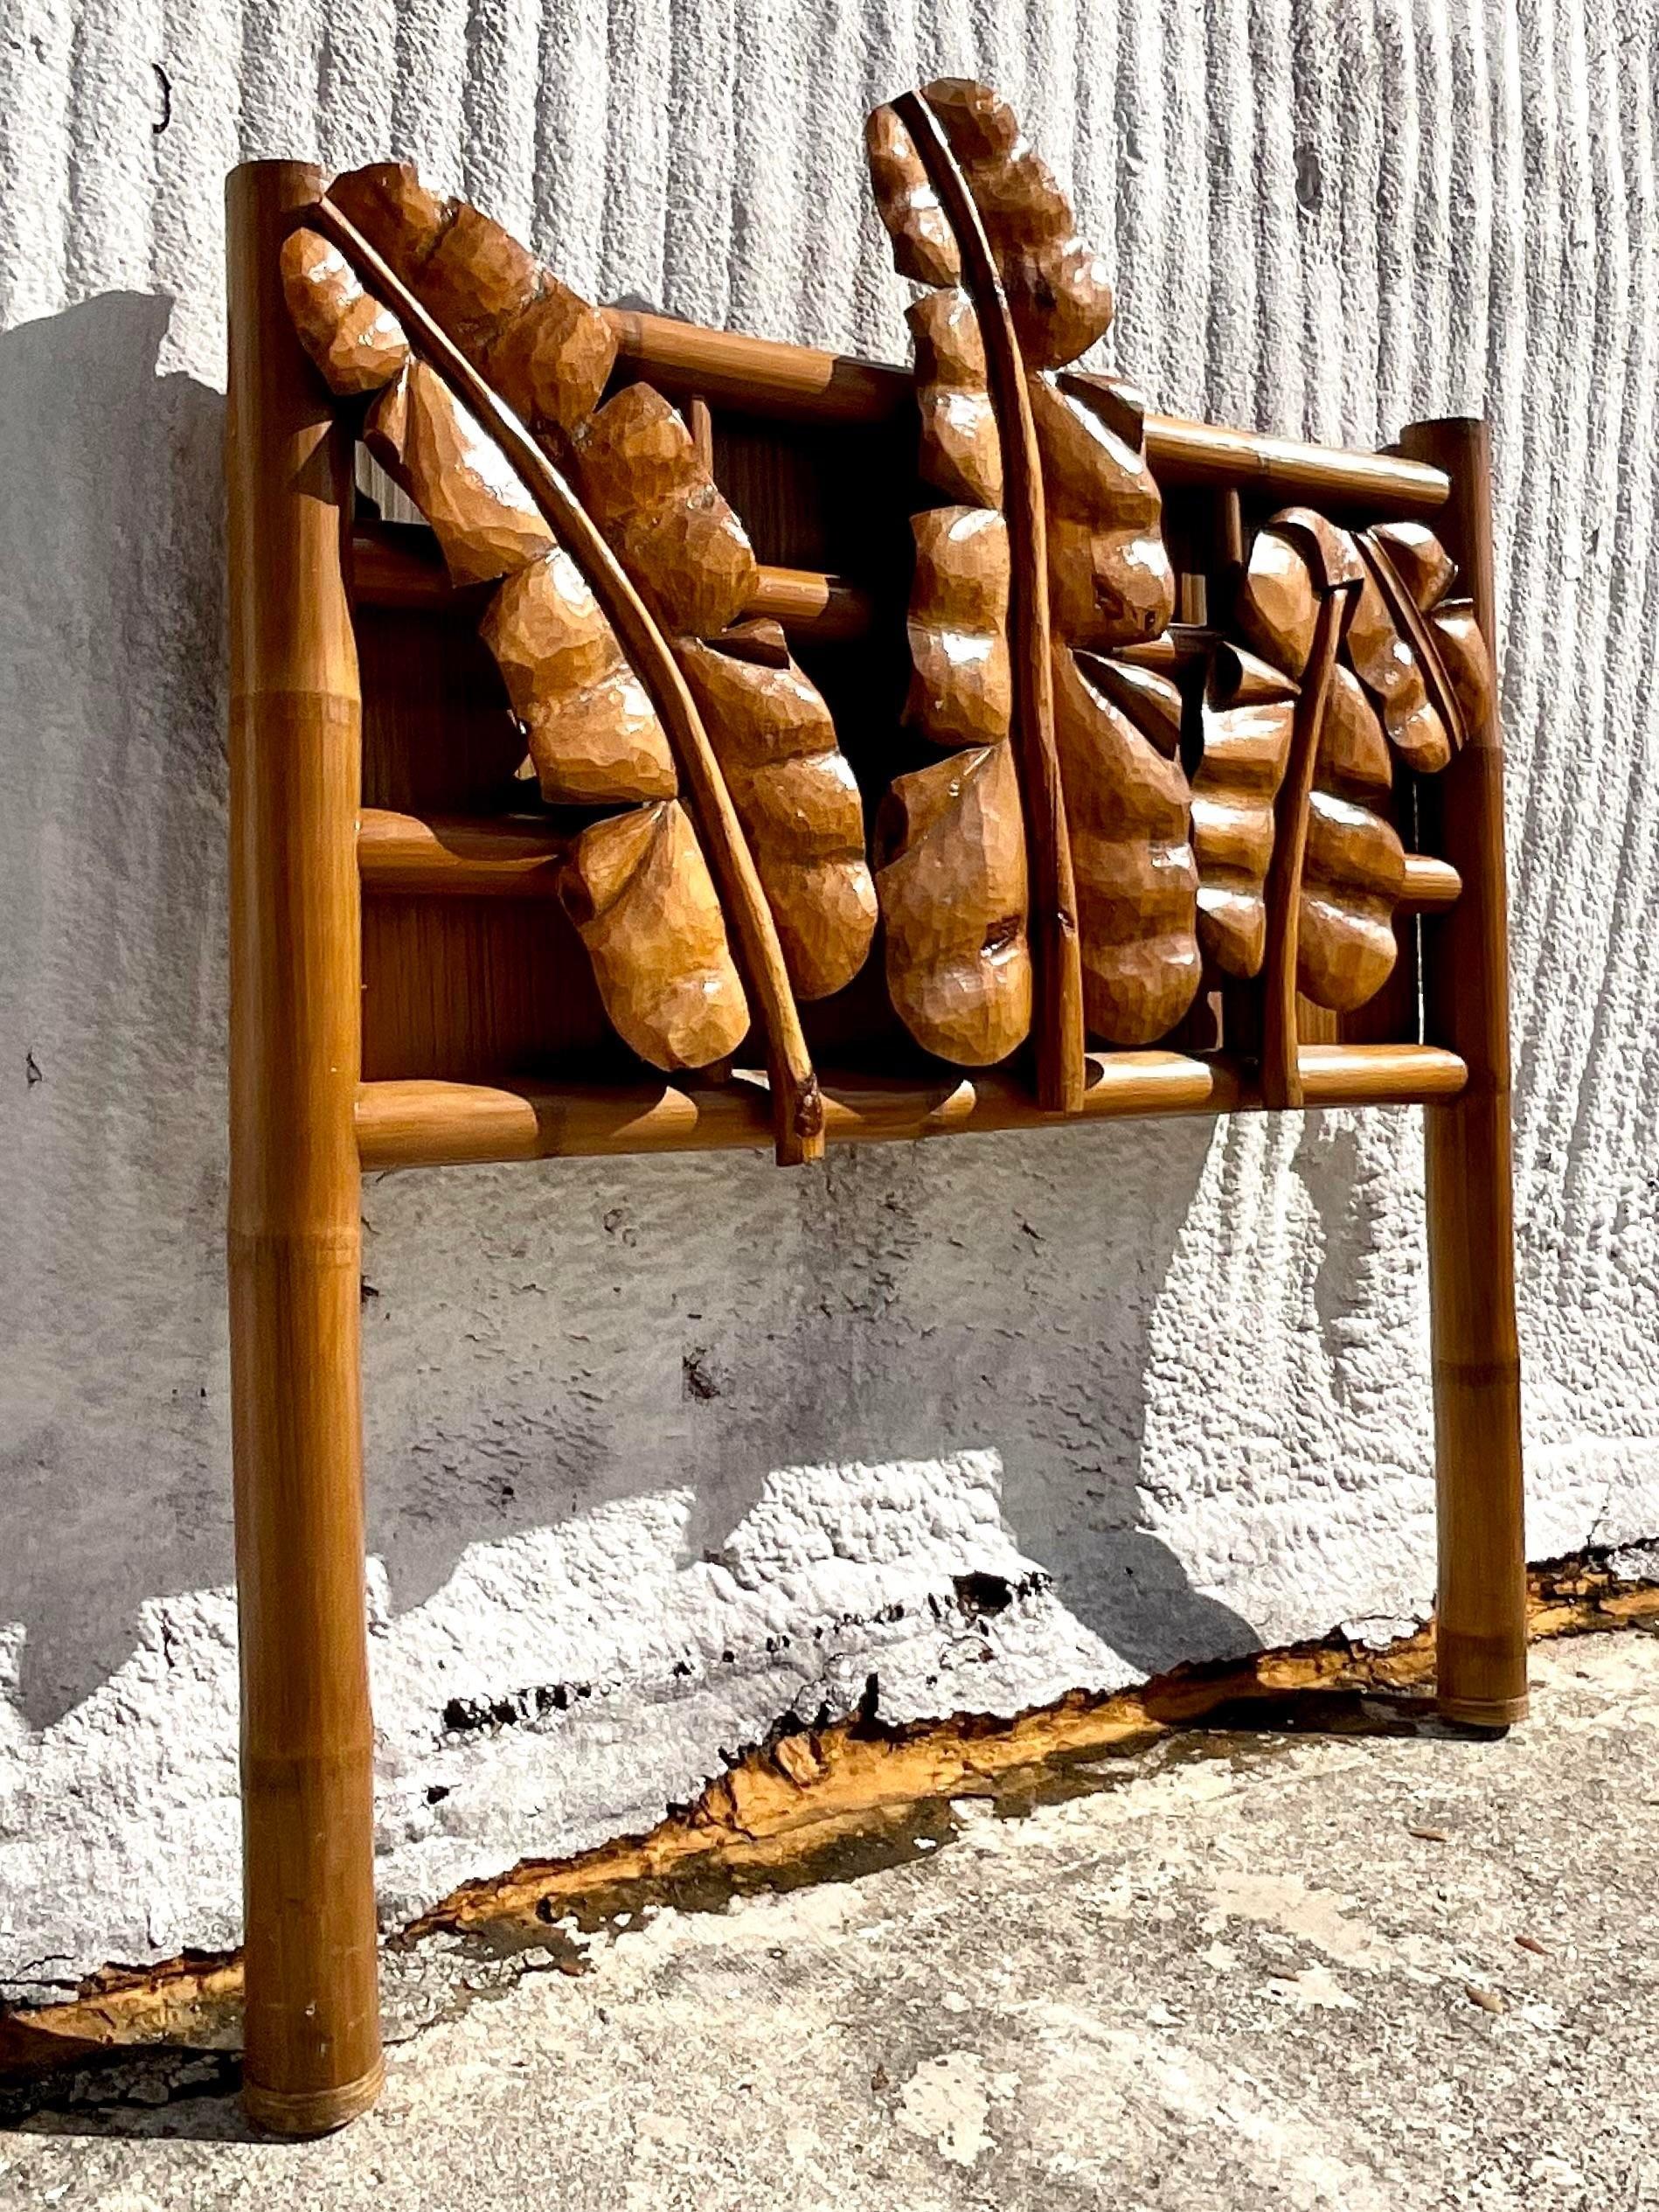 A fabulous vintage Coastal Queen headboard. A chic carved banana leaf design on a heavy bamboo frame. Acquired from a Palm Beach estate.